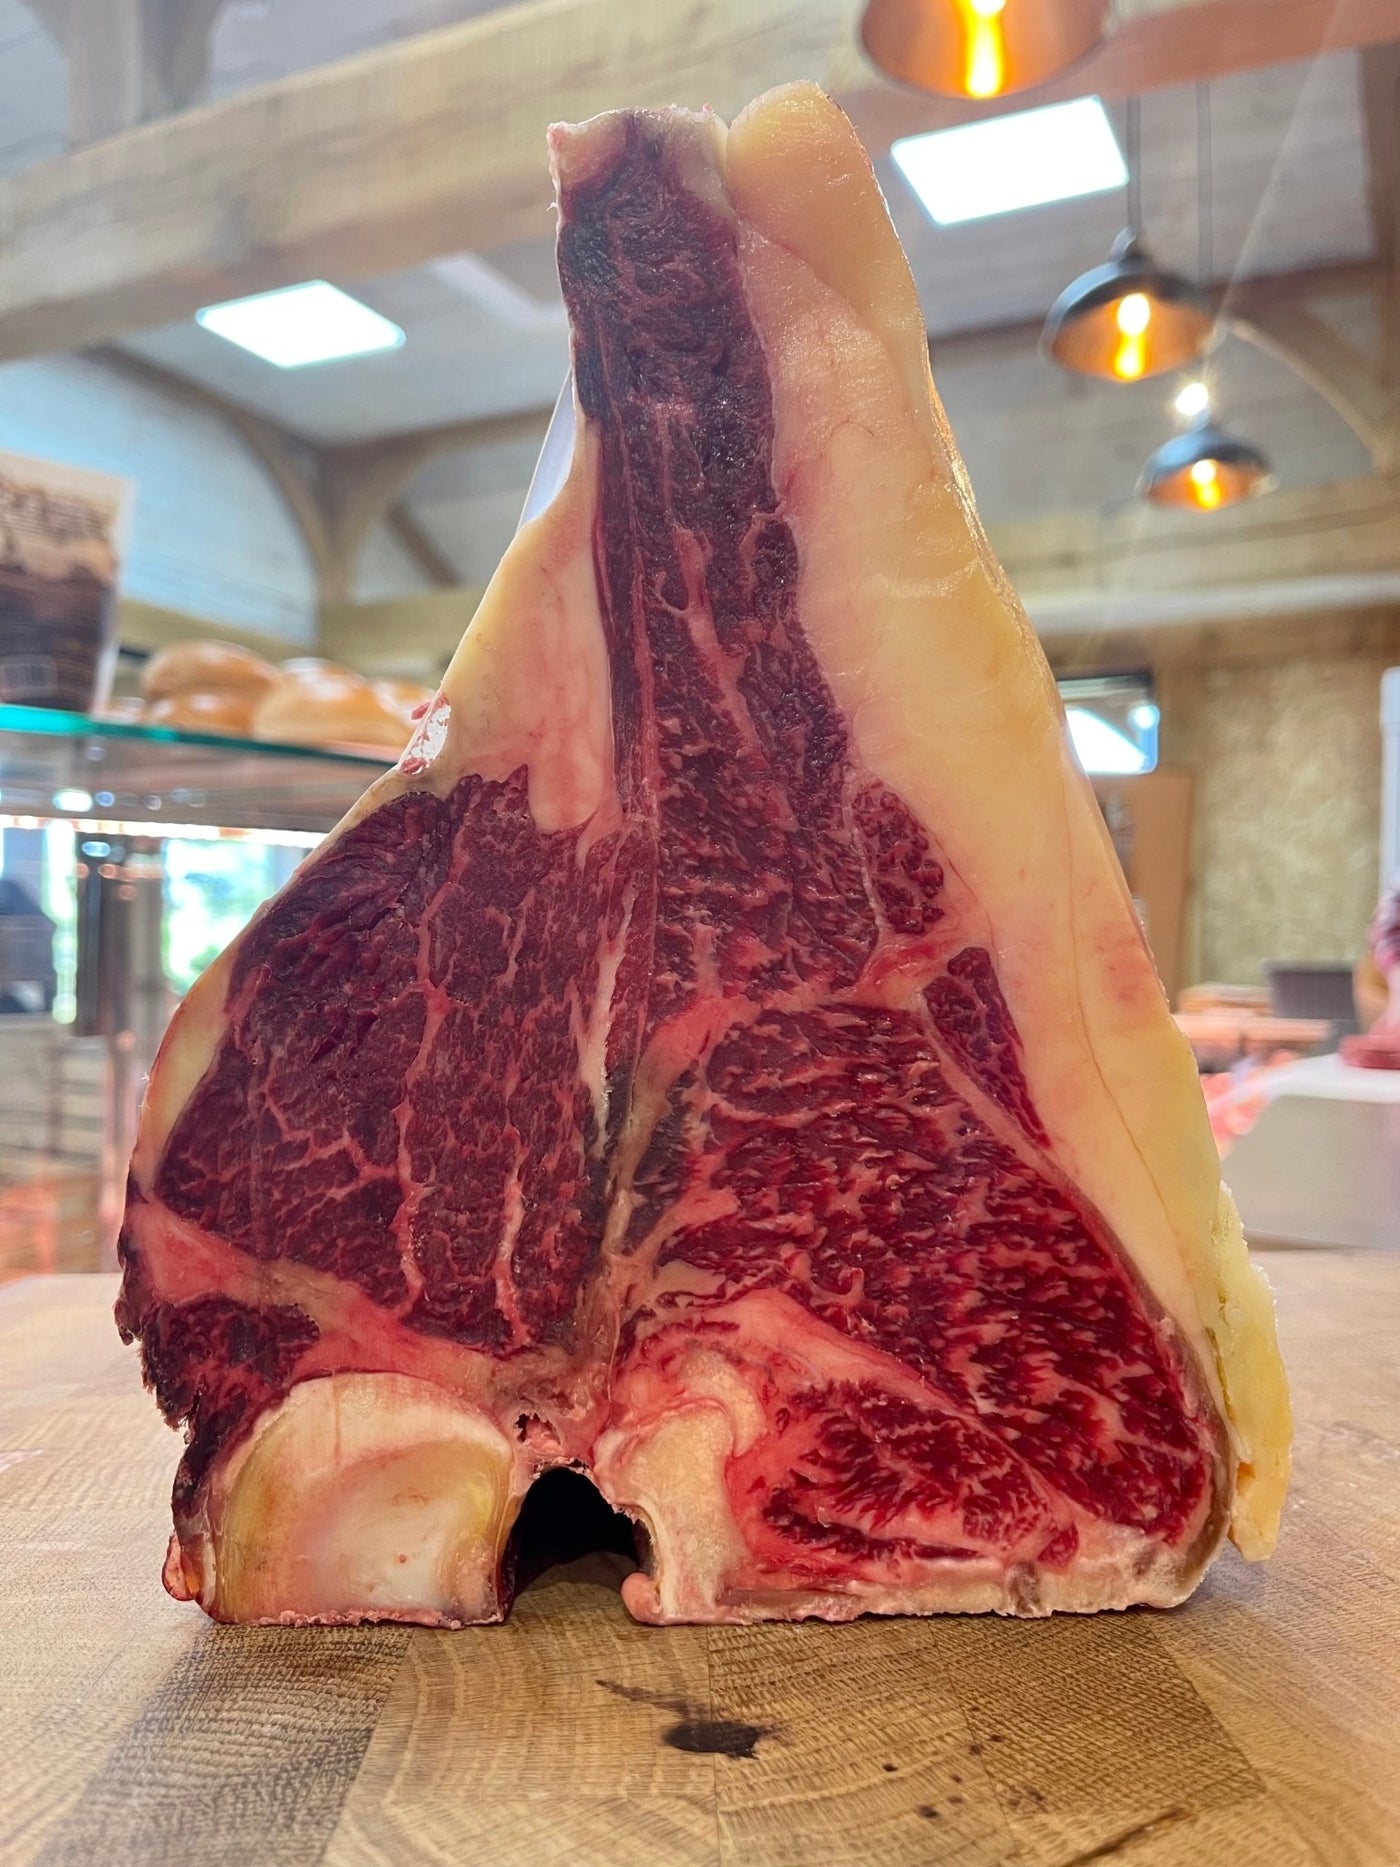 45 Day Dry-Aged Spanish Rubia Gallega - Thomas Joseph Butchery - Ethical Dry-Aged Meat The Best Steak UK Thomas Joseph Butchery